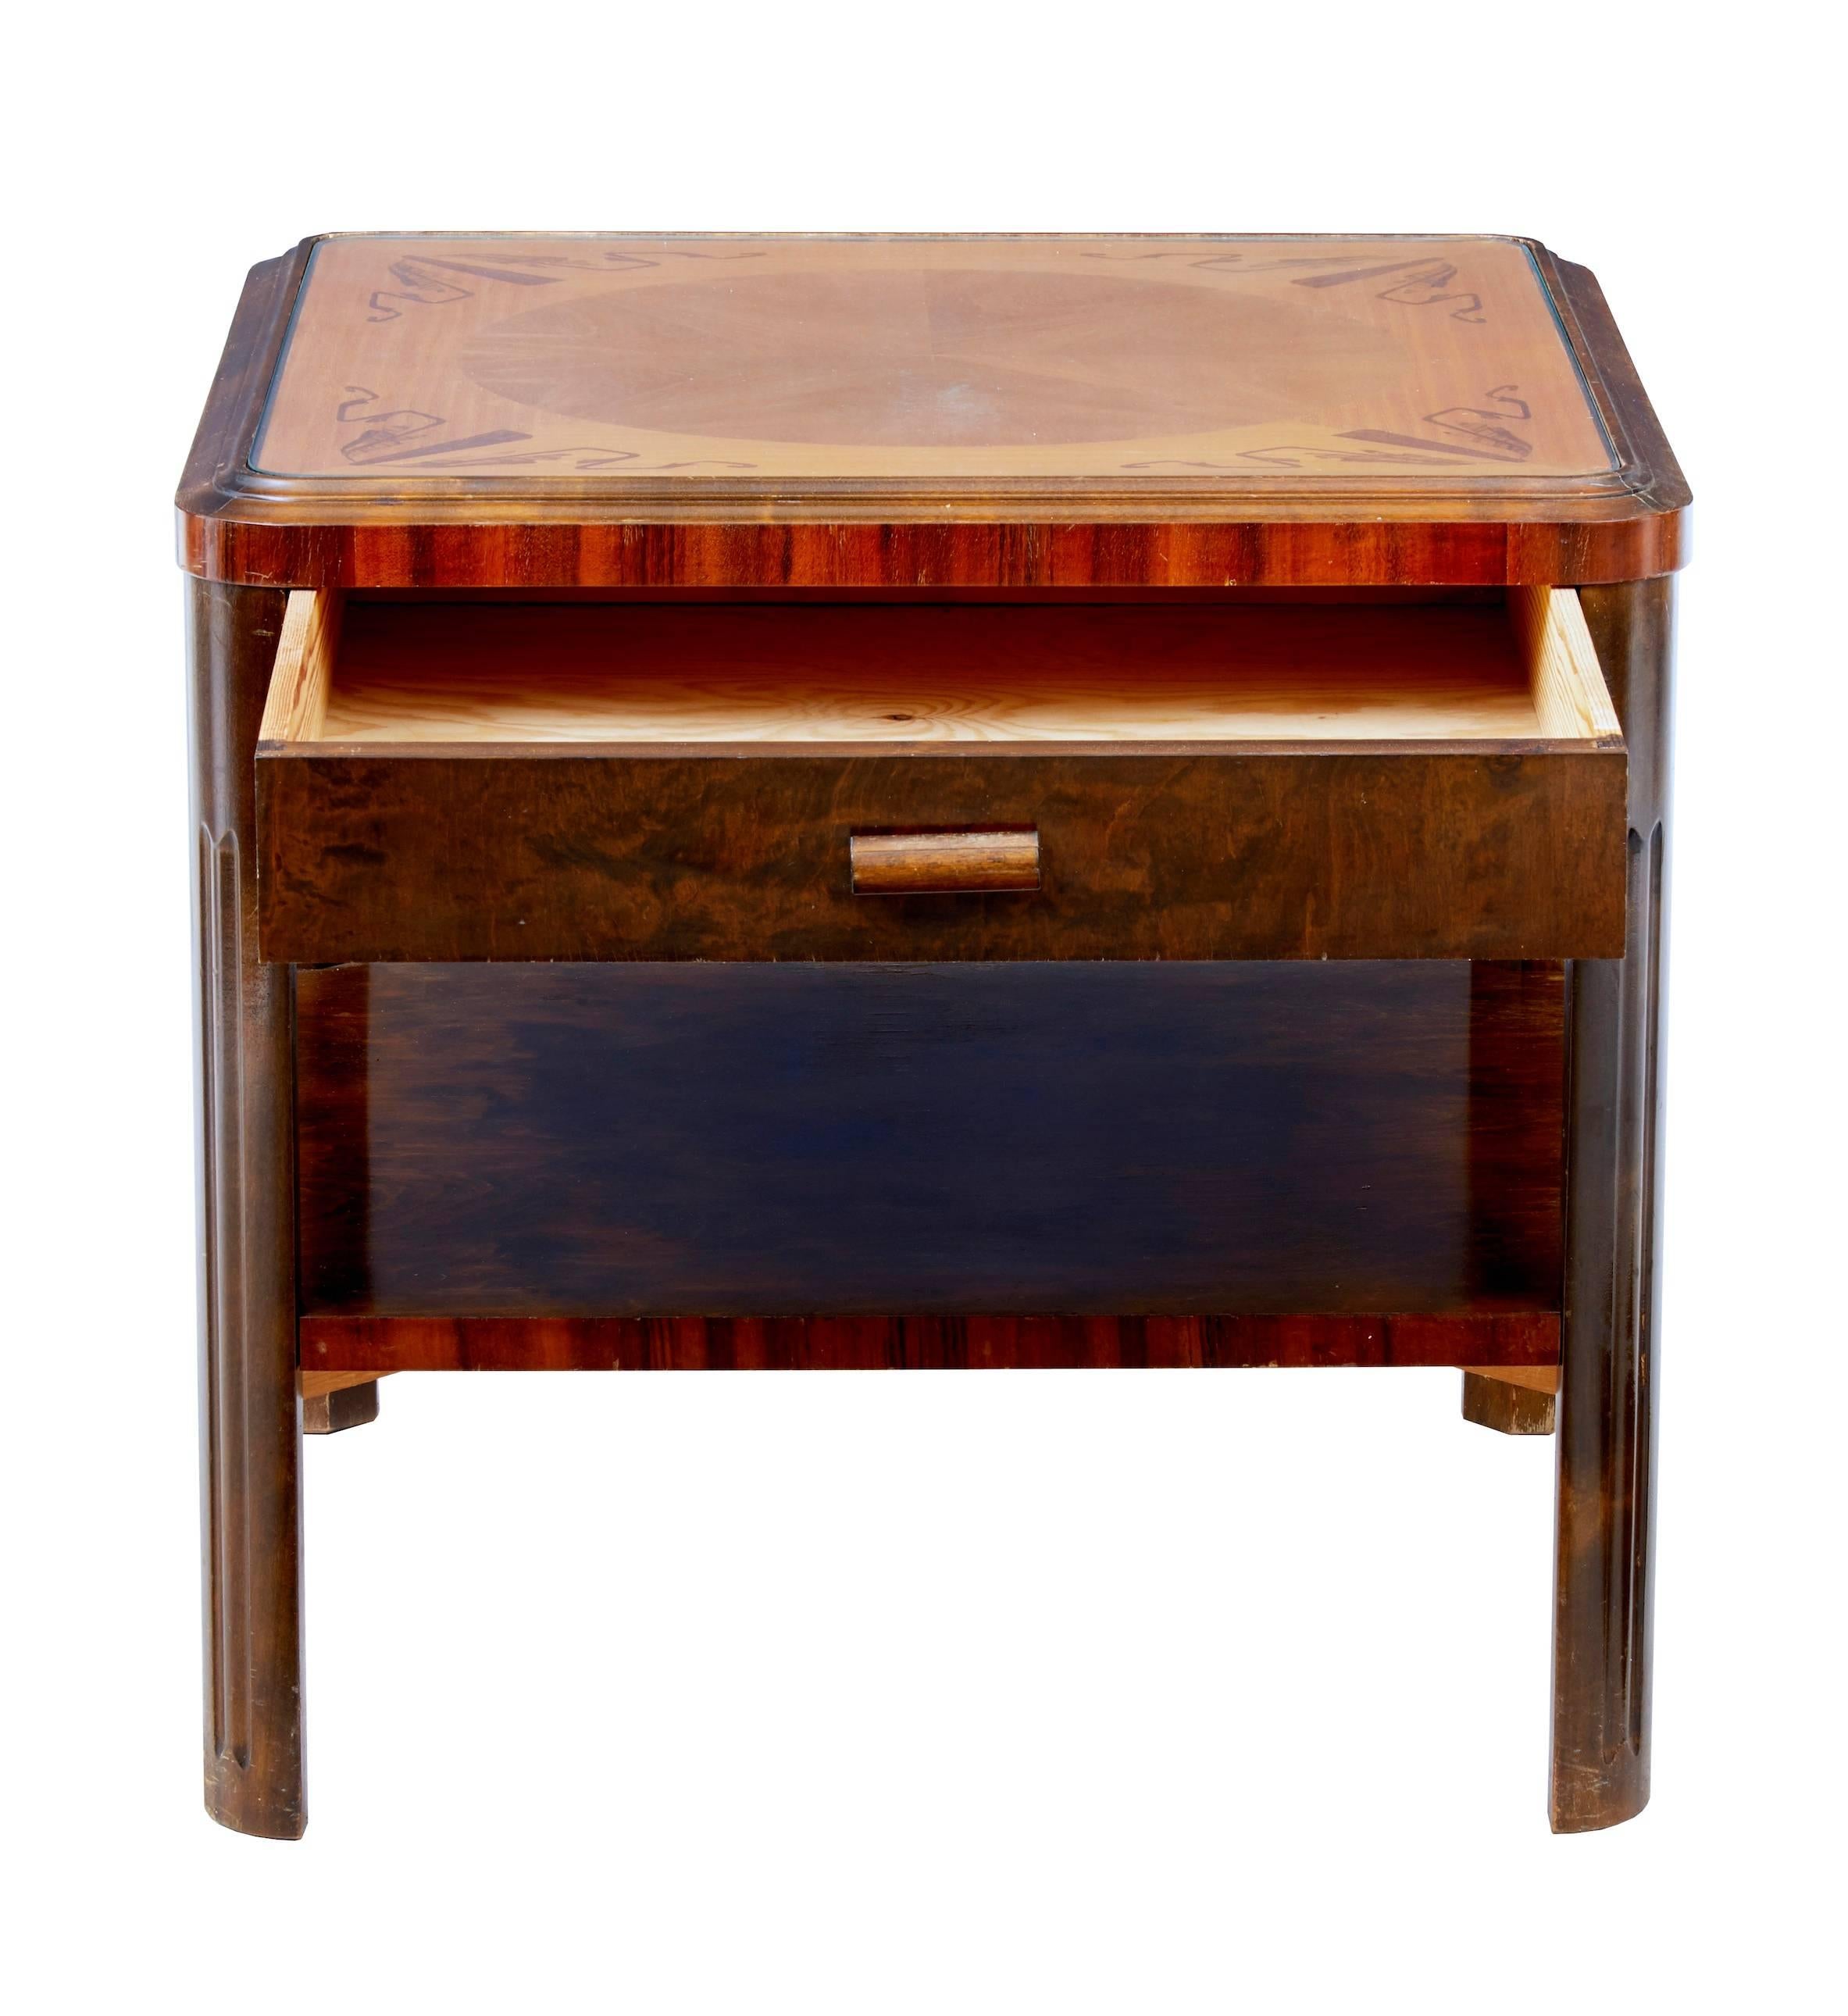 Good quality Swedish birch coffee table, circa late 1940s.
Inlaid and crossbanded with walnut, rosewood and further birch. Protected by a glass drop in top.
Single drawer to the front with shelf space below.
Minor marks to woodwork.

Height: 22